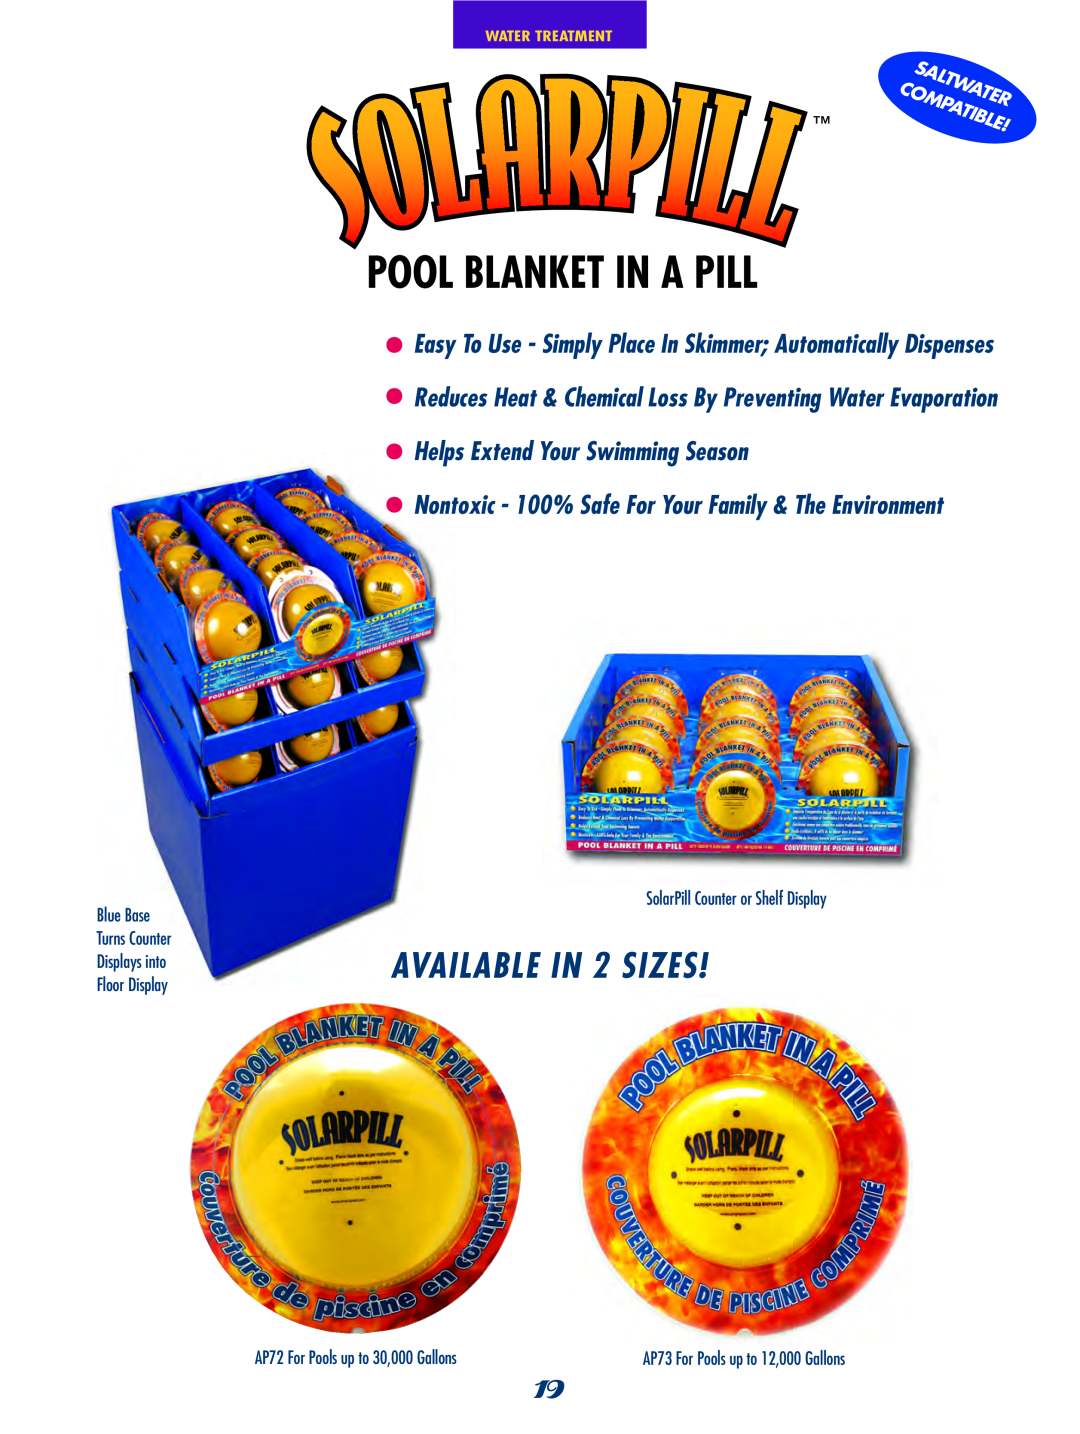 SmartPool Inc NC31 manual Pool Blanket In A Pill, AVAILABLE IN 2 SIZES, Helps Extend Your Swimming Season, Water Treatment 